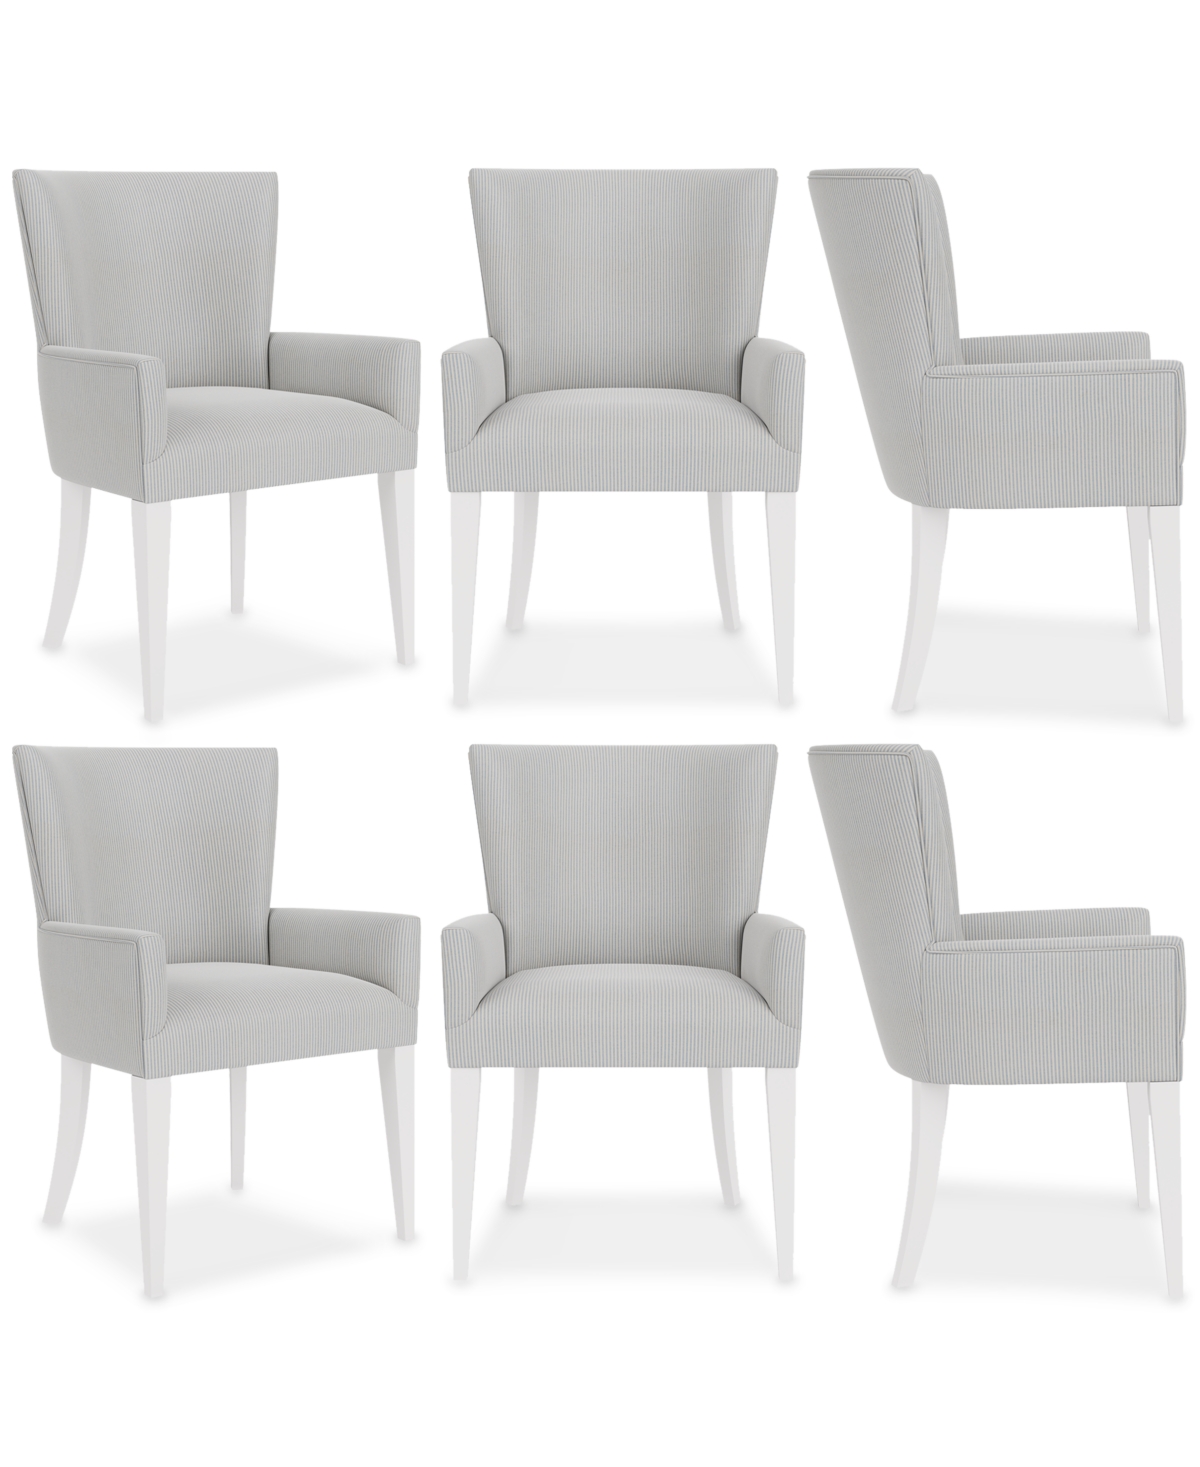 Shop Macy's Catriona 6 Pc. Upholstered Arm Chair Set In Grey